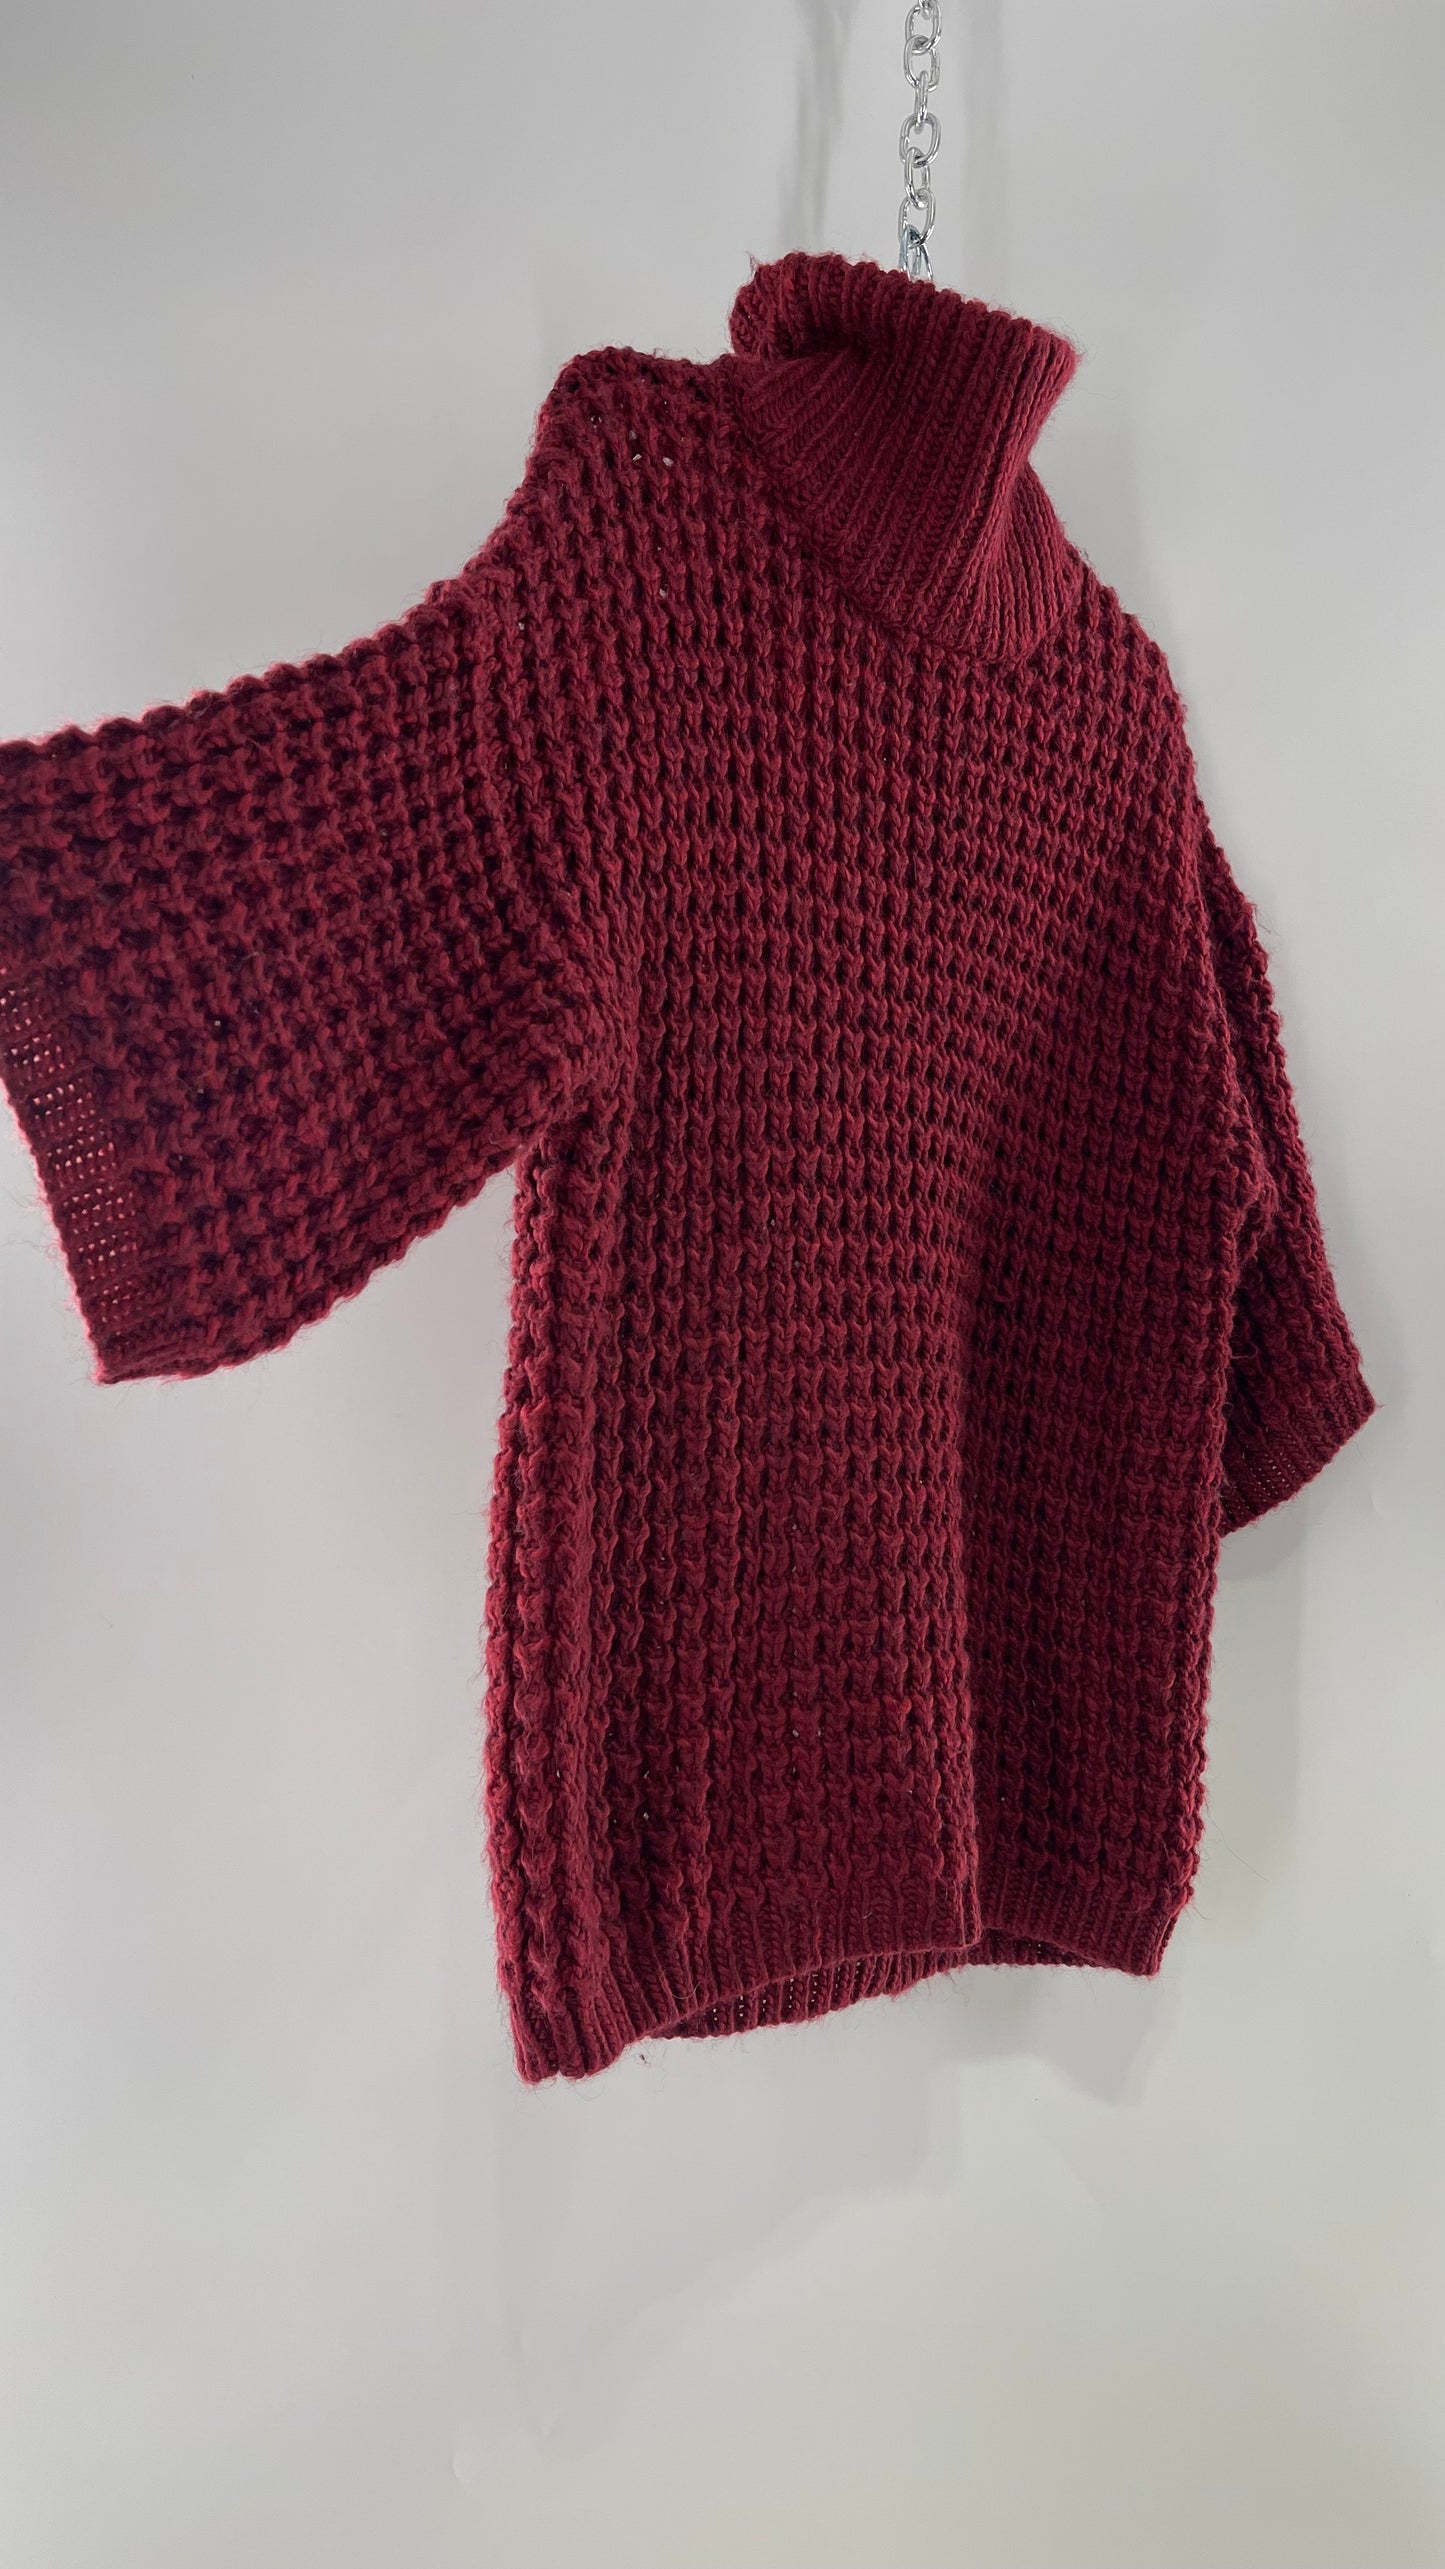 Anthropologie Thick Knit Burgundy/Maroon Short Sleeve Slouchy Turtle/Mock Neck Sweater (Large)